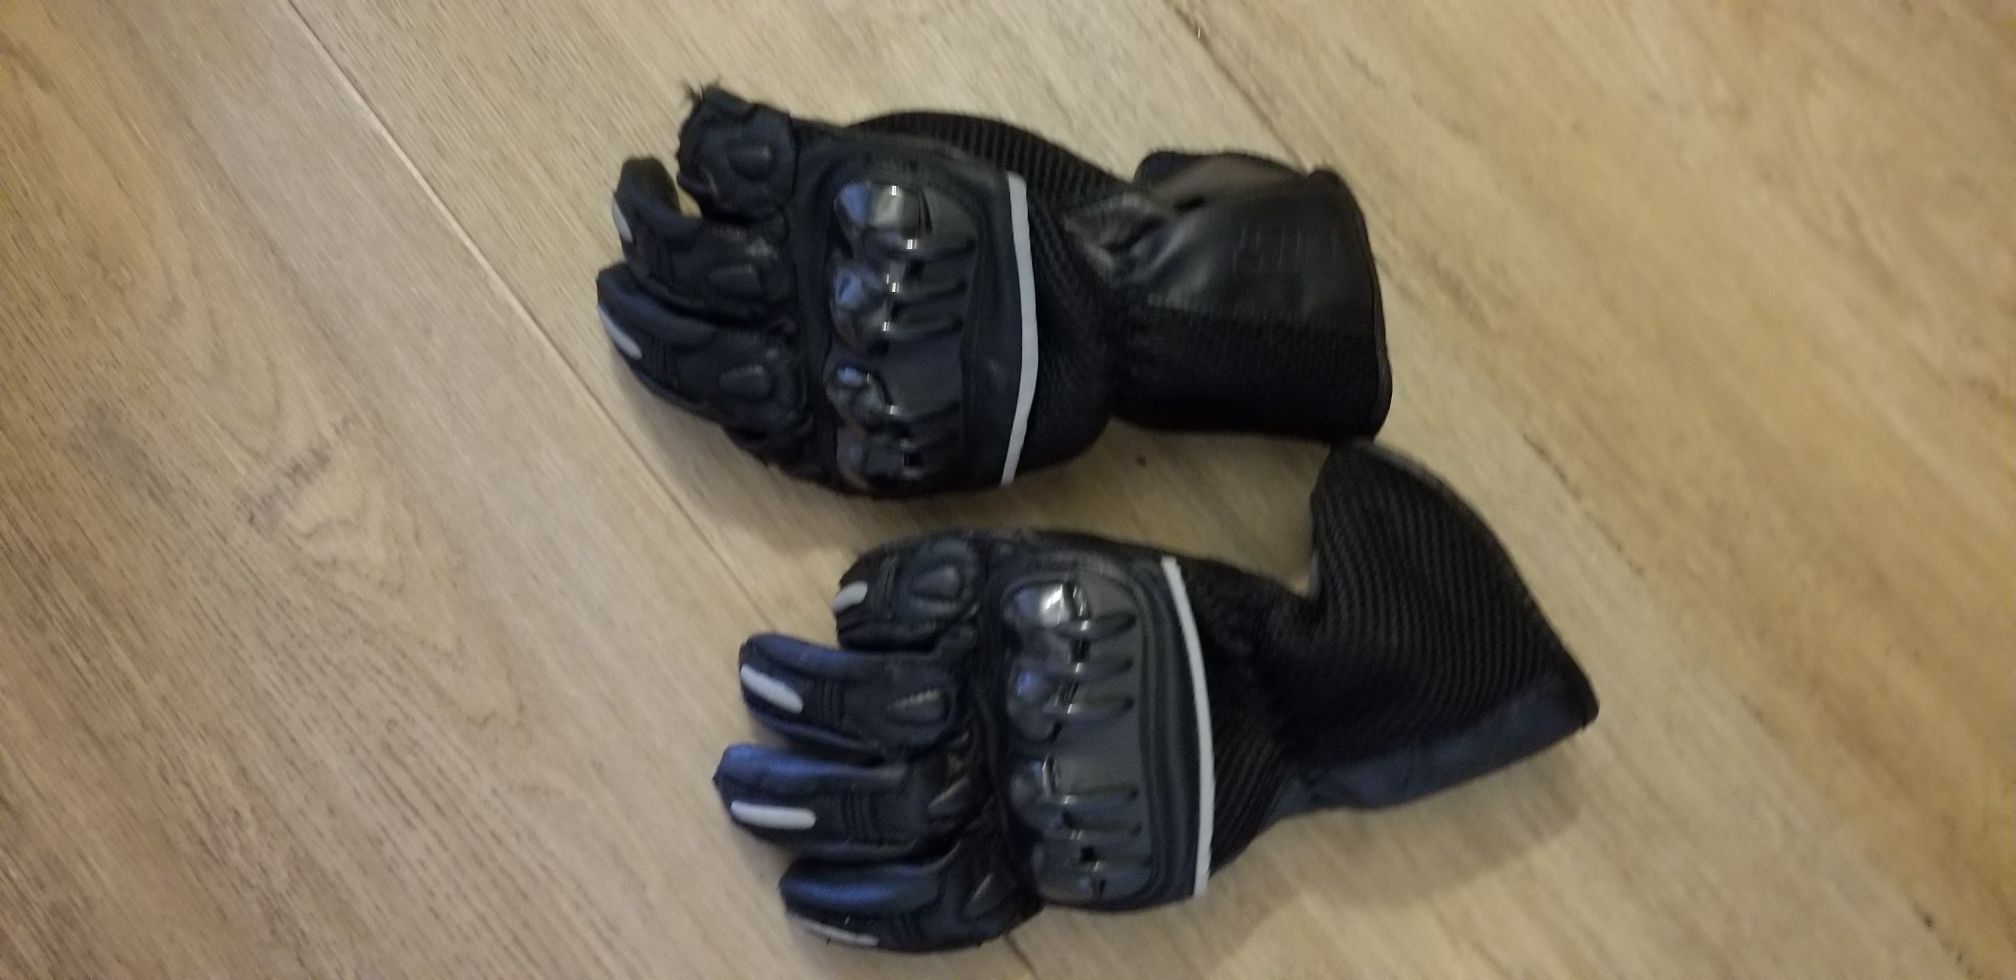 Motorcycle riding gloves